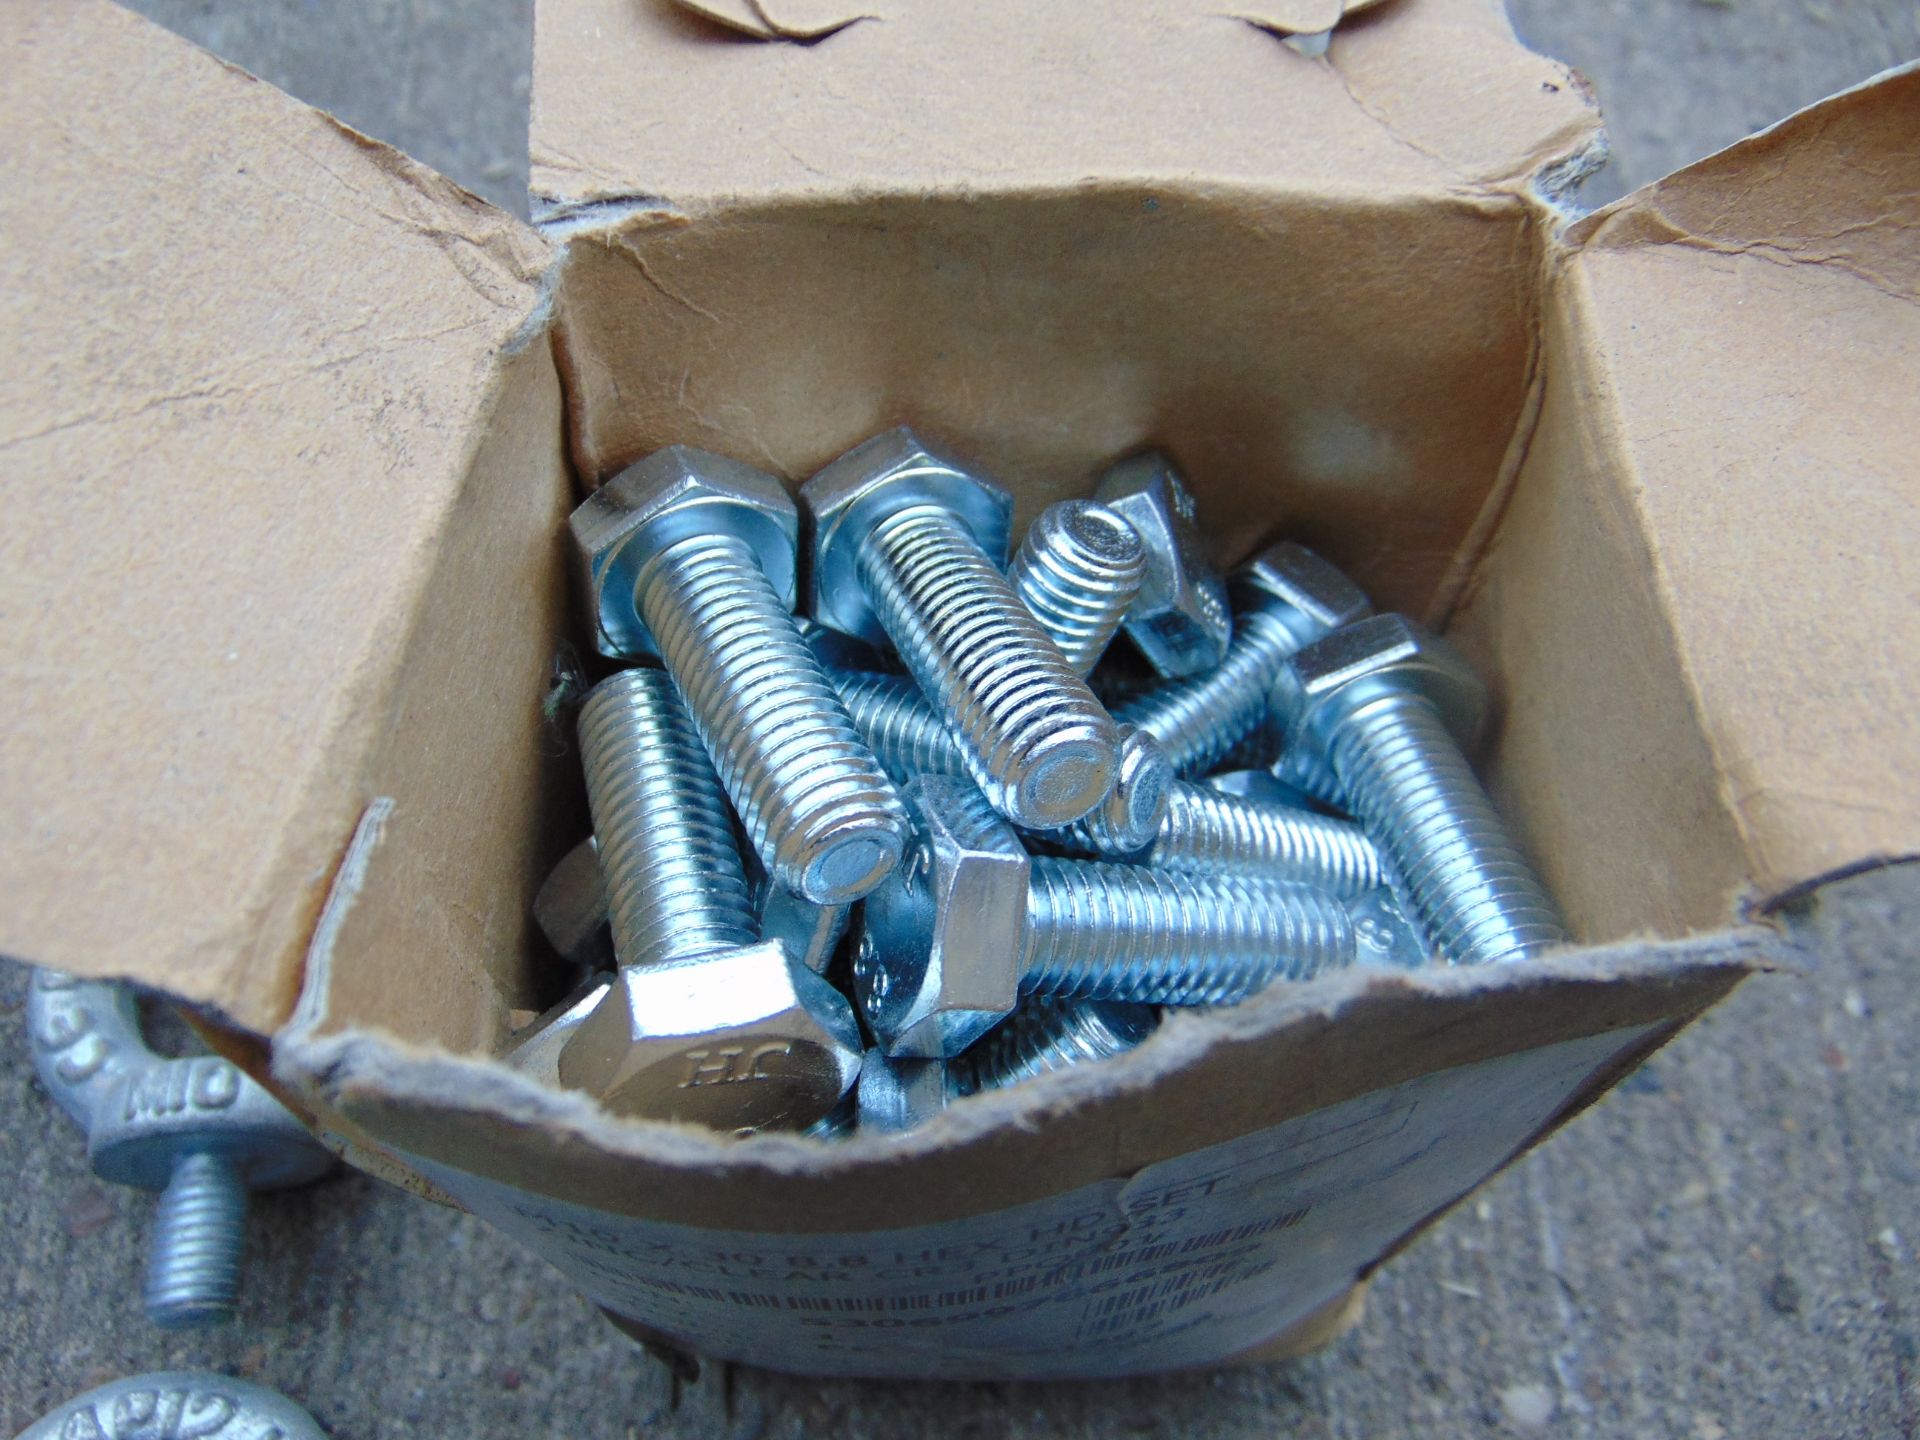 15 x M10 0.23t EYEBOLTS, 3 x WIRE ROPE CLAMPS, 30CWT D SHACKLE AND A BOX OF M10 x 30mm BOLTS - Image 6 of 6